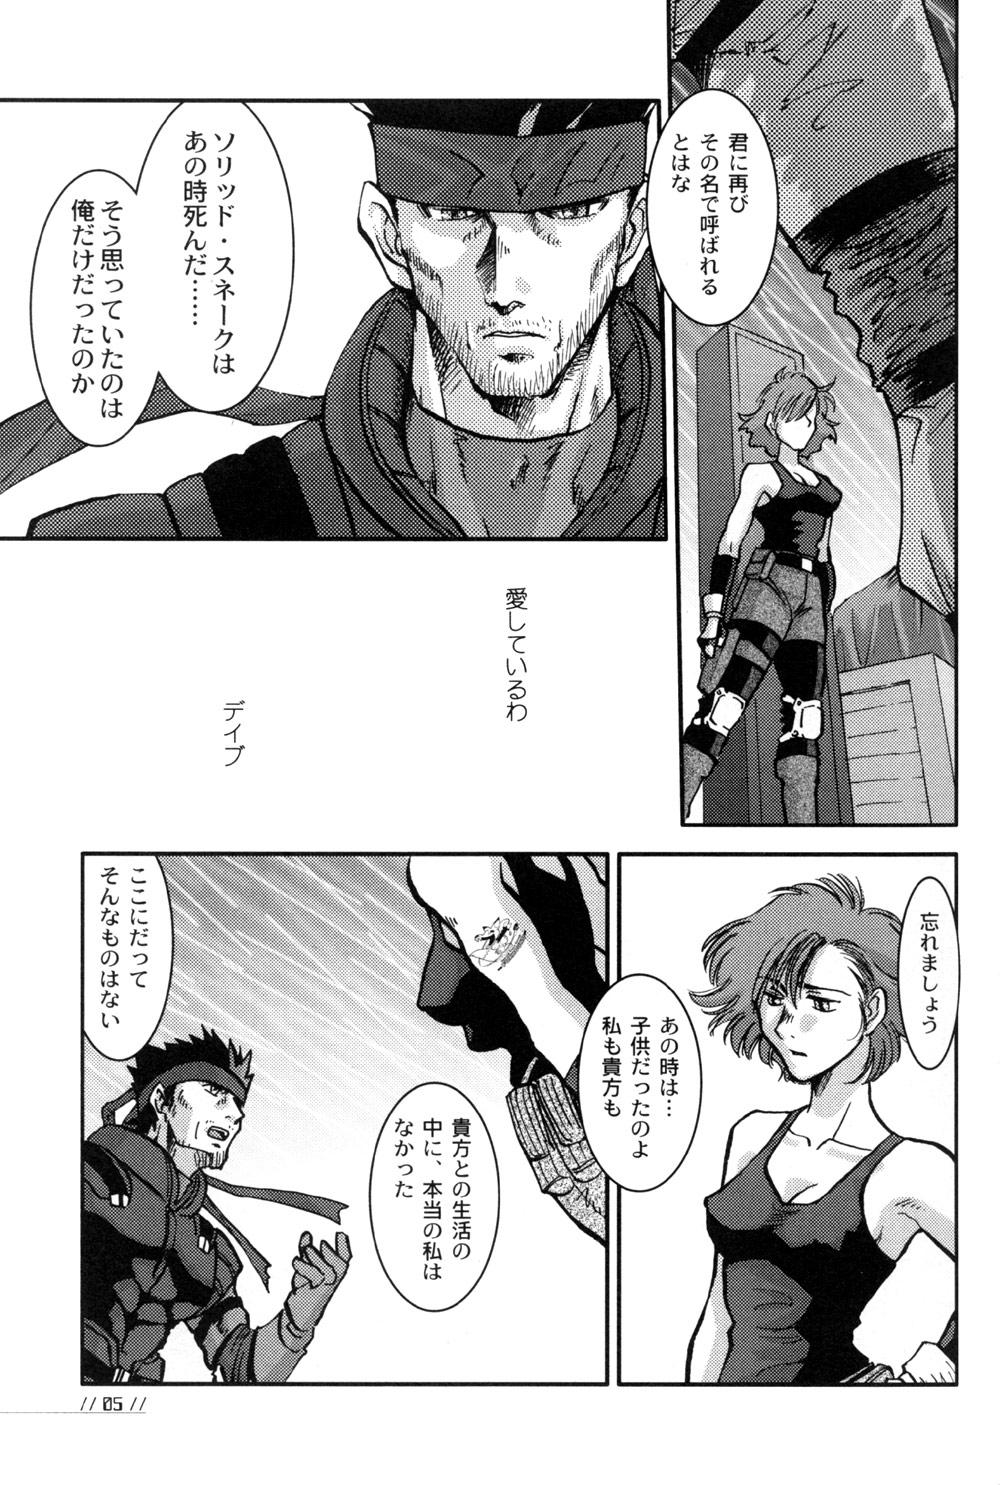 Dance Nomad - Metal gear solid Romantic - Page 5